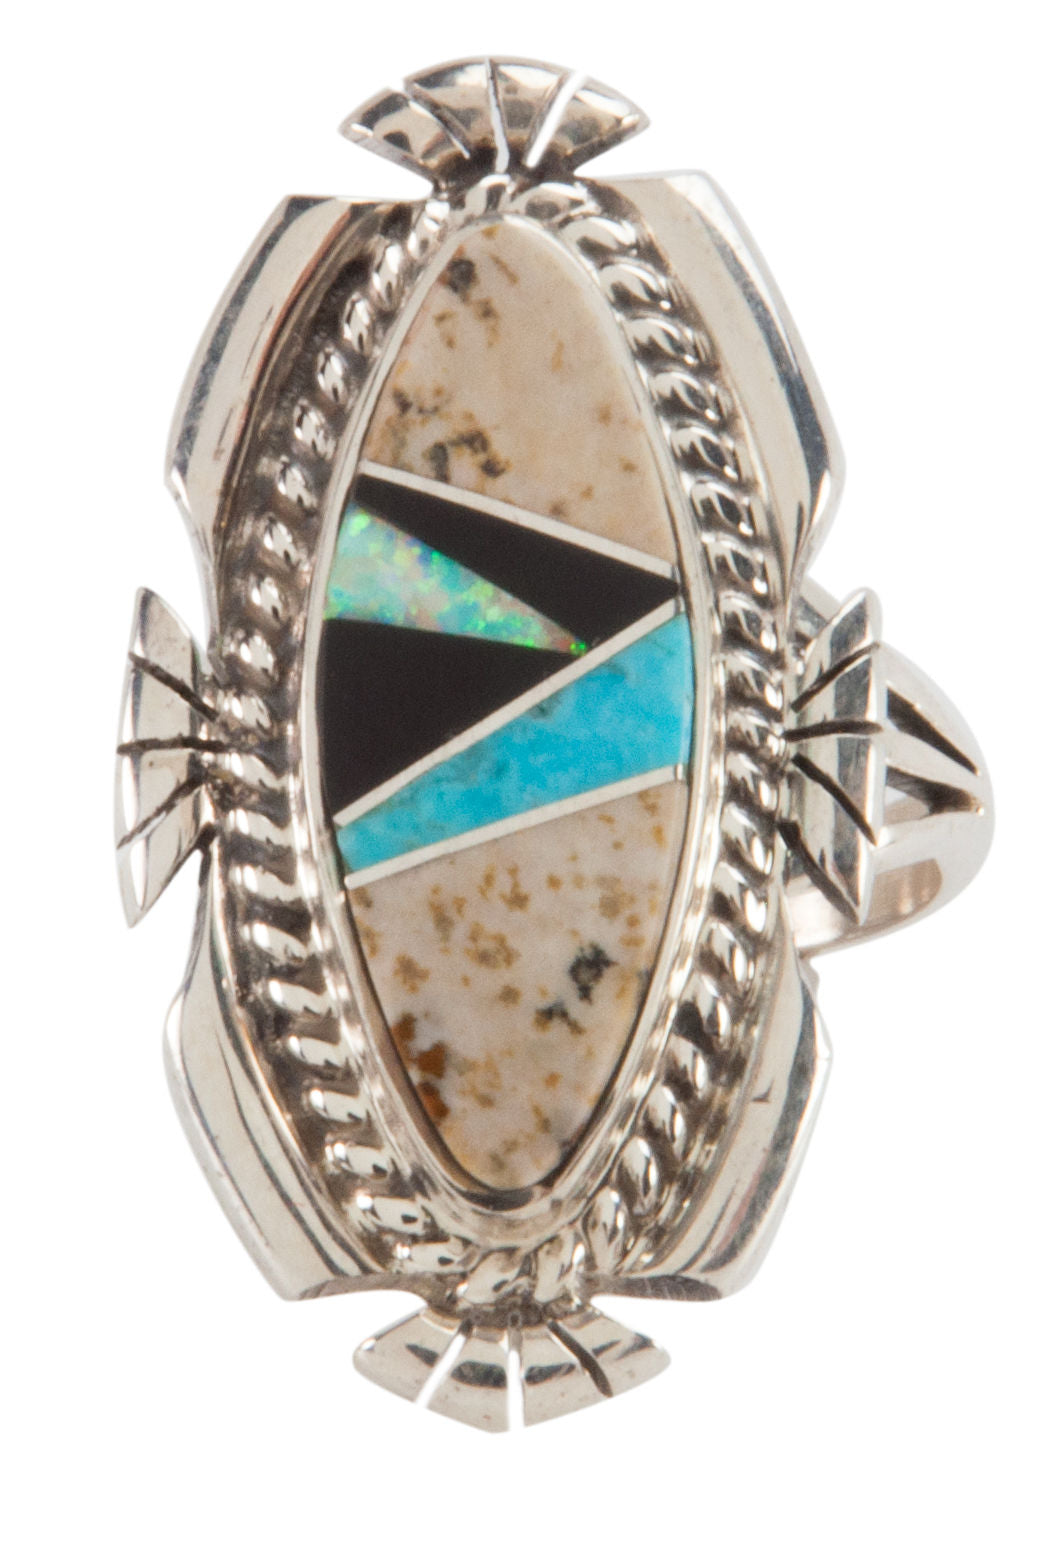 Navajo Native American Turquoise and Jasper Ring Size 5 1/4 by Tom SKU223637